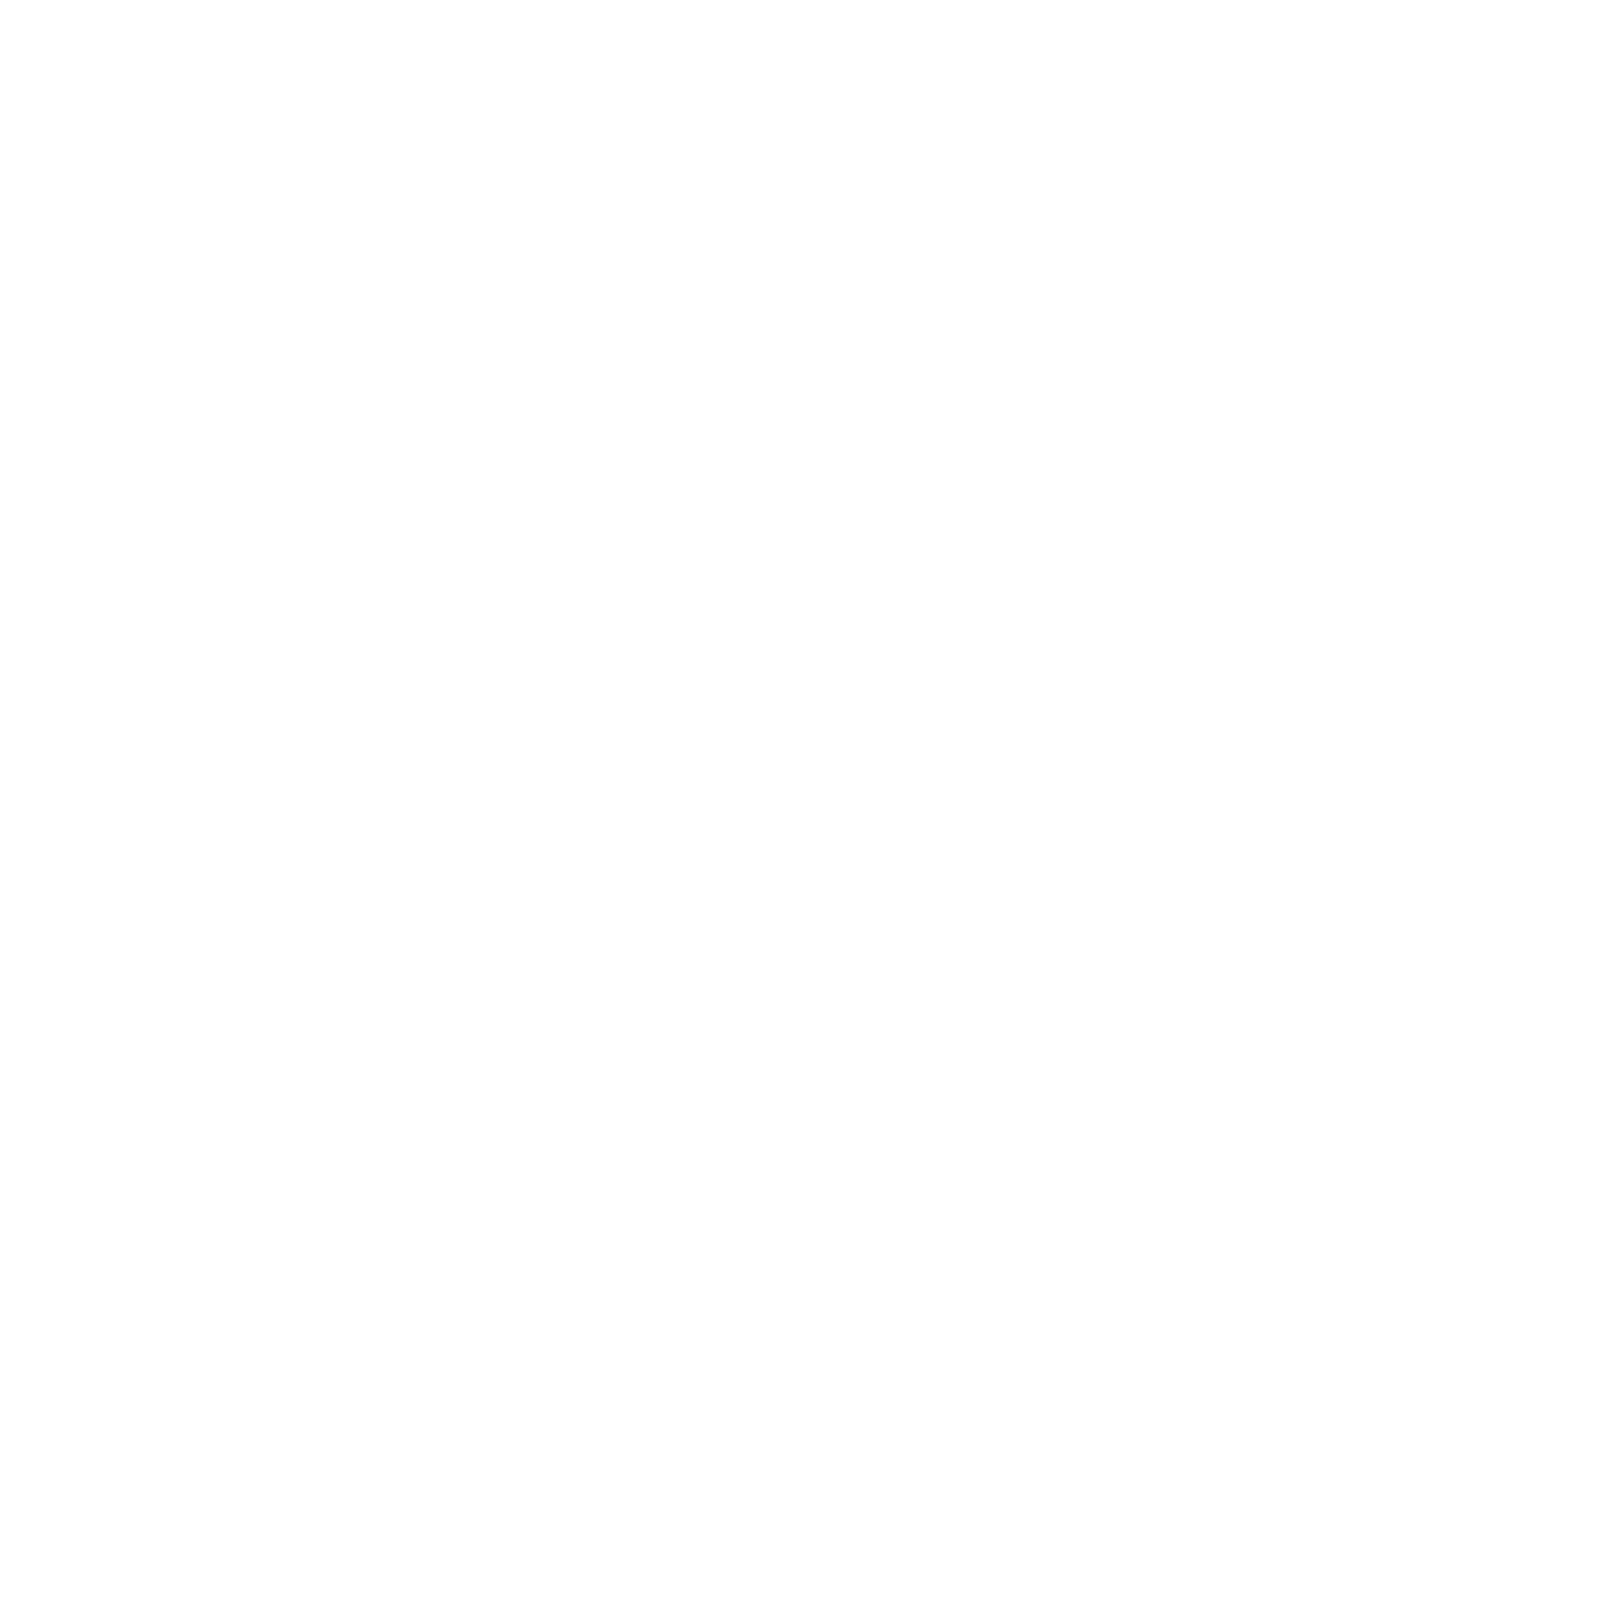 Tamworth Regional Council logo in white on transparent background